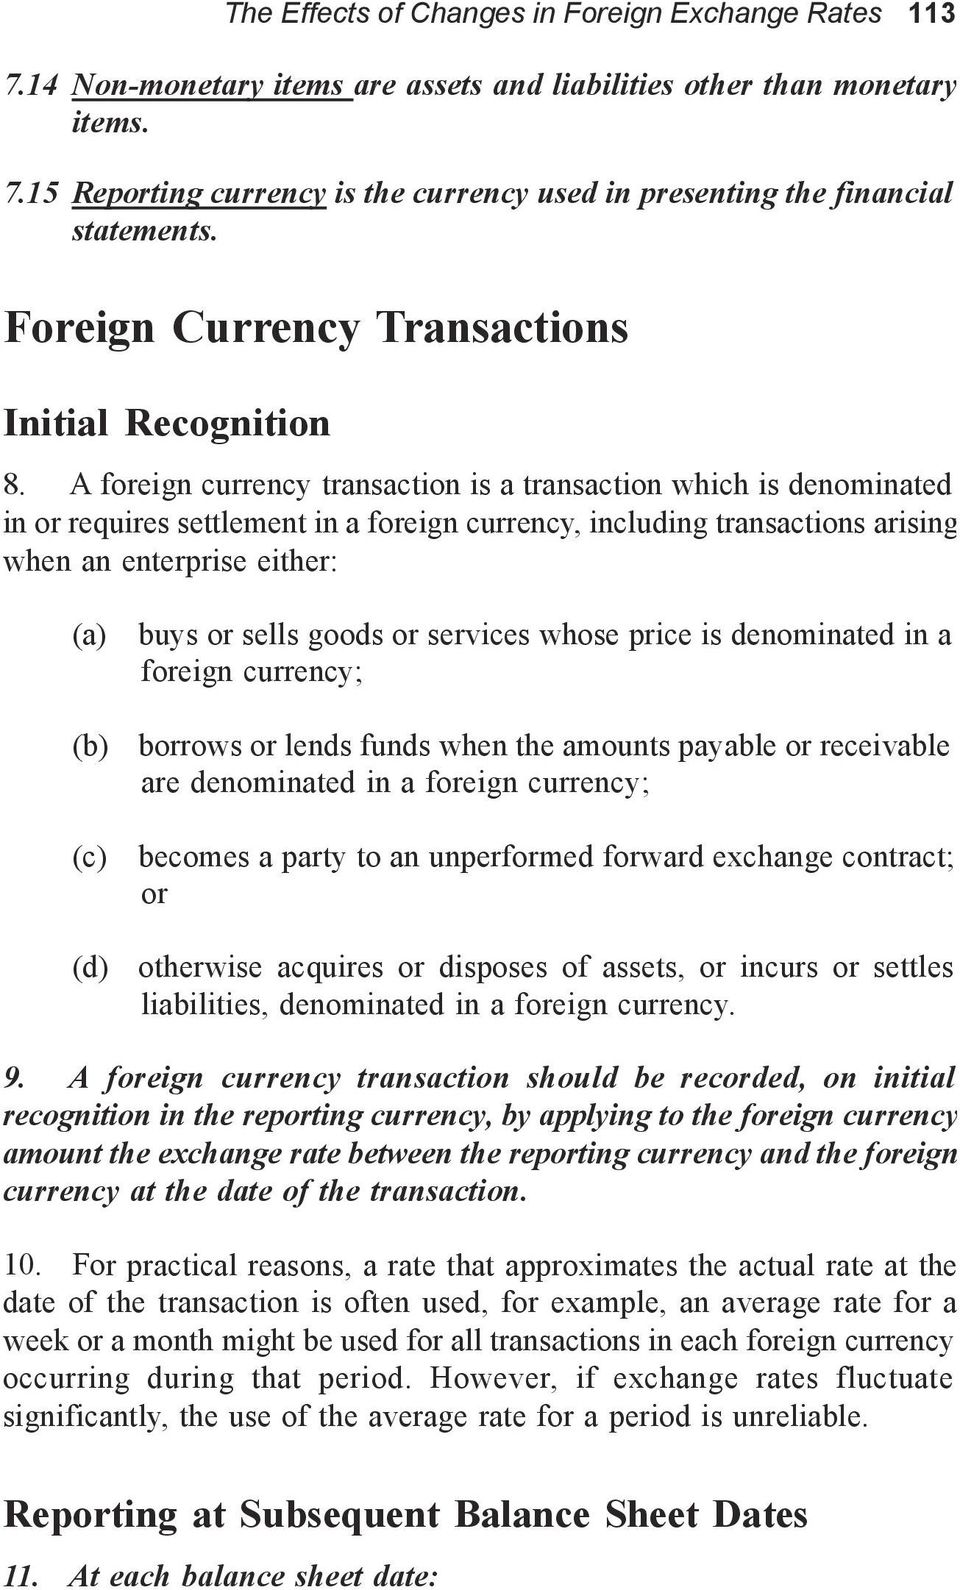 A foreign currency transaction is a transaction which is denominated in or requires settlement in a foreign currency, including transactions arising when an enterprise either: (a) buys or sells goods